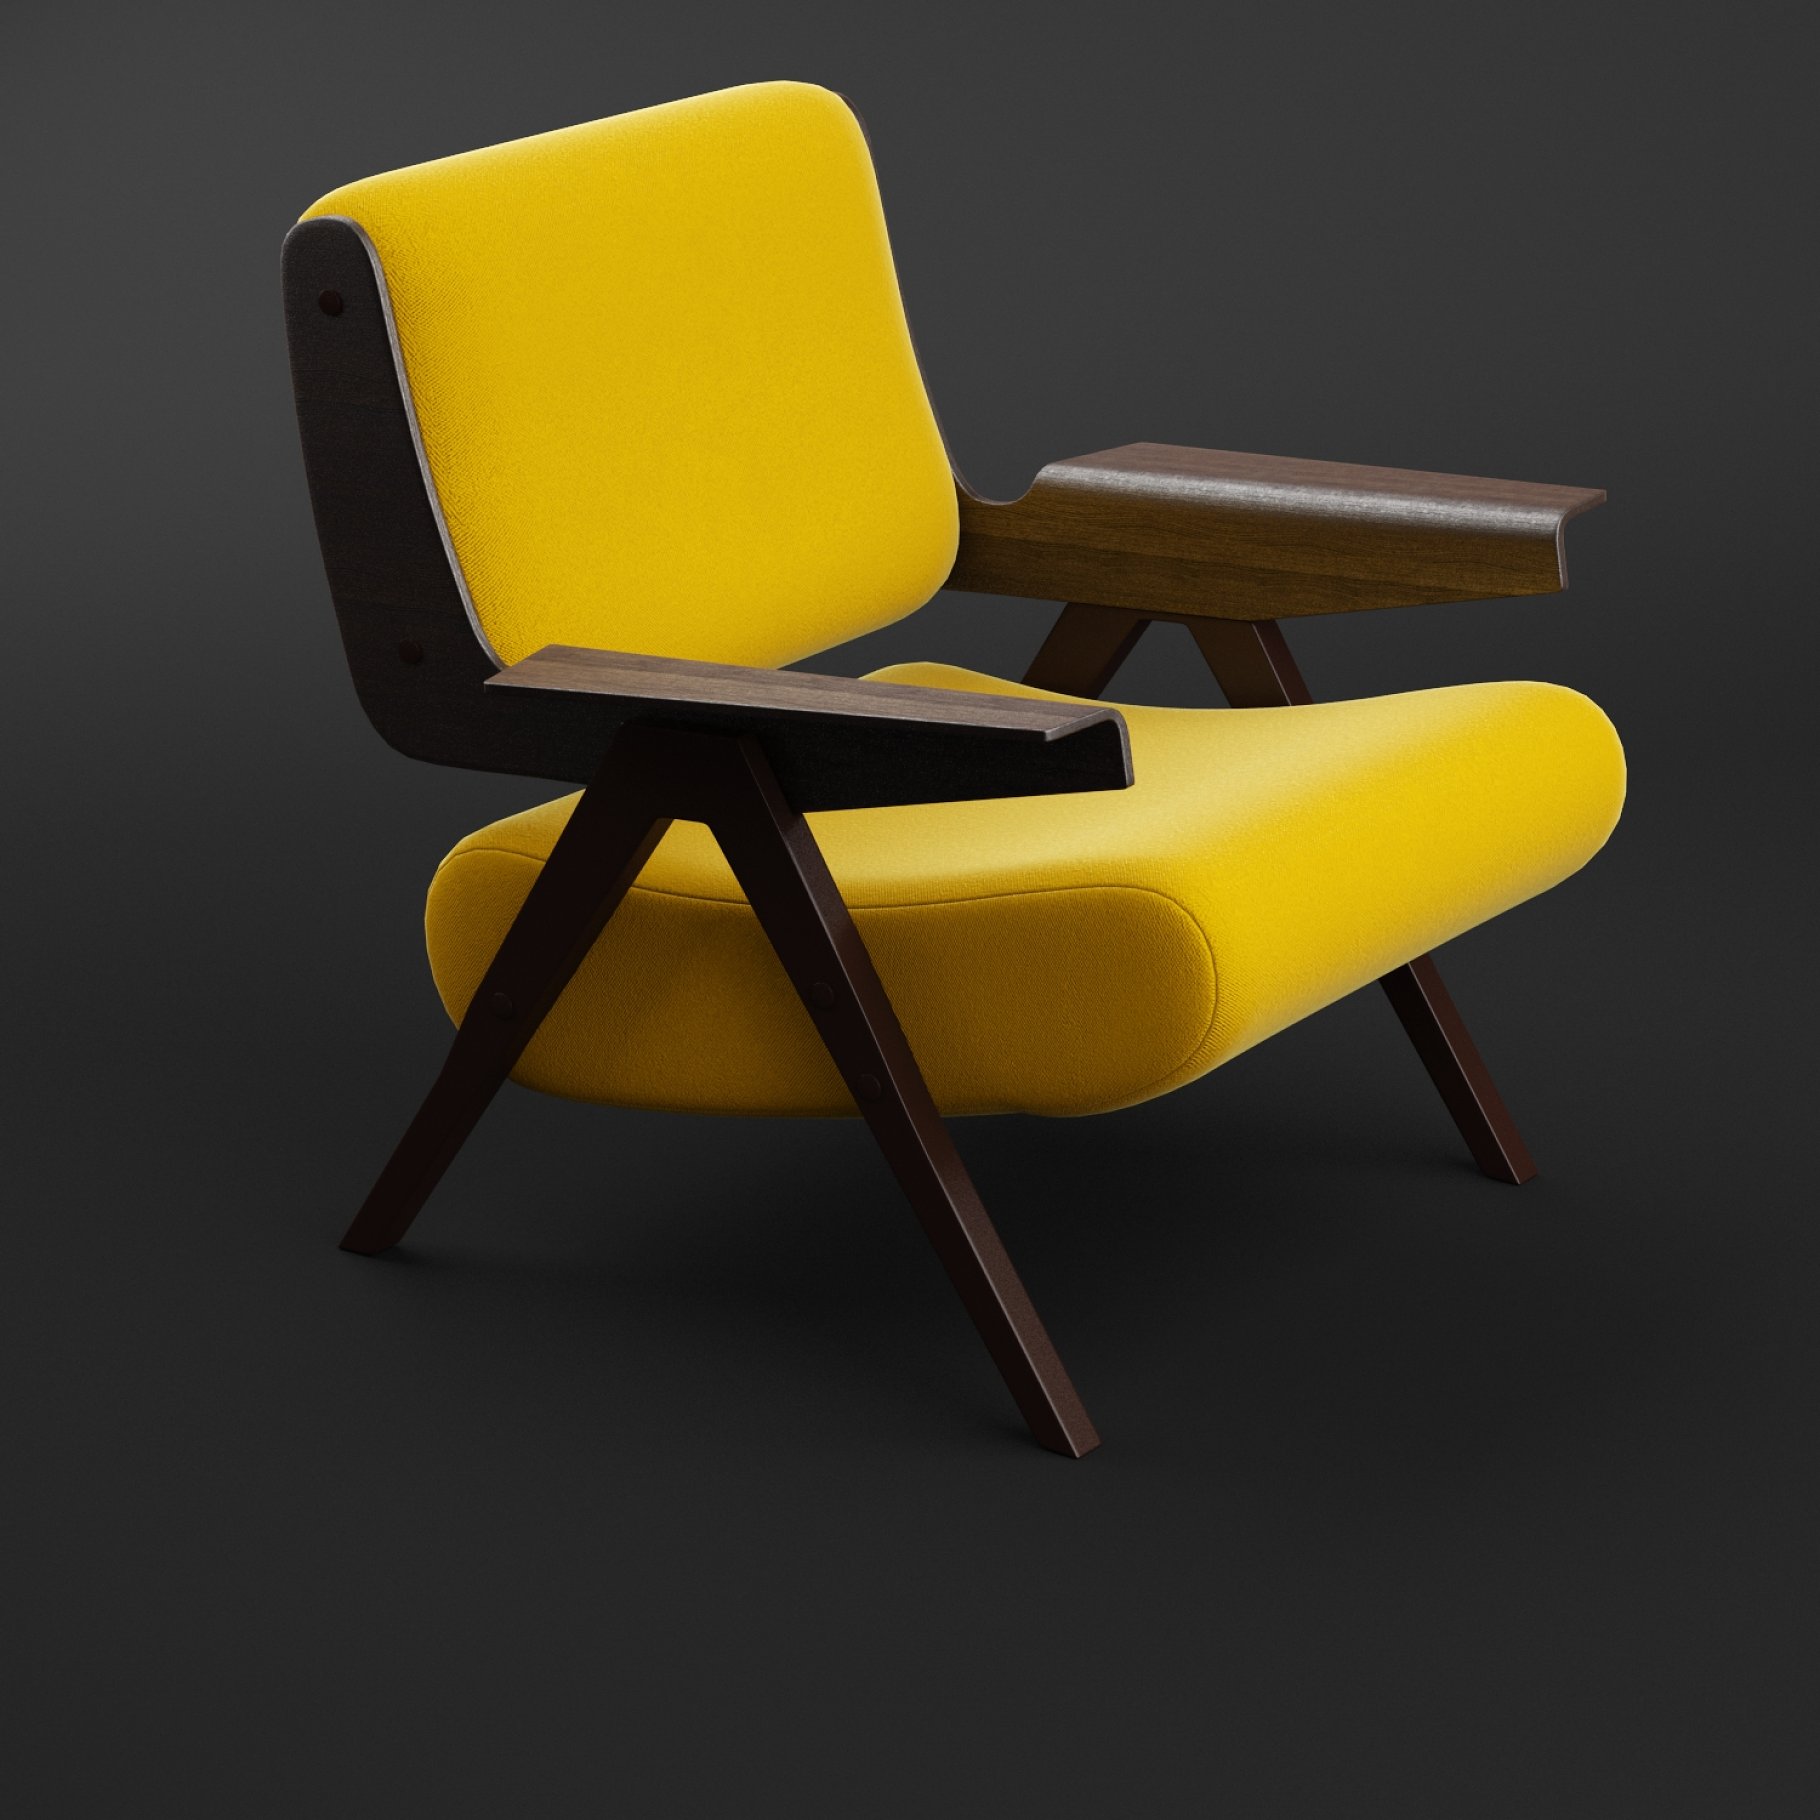 A yellow chair with wooden handles.